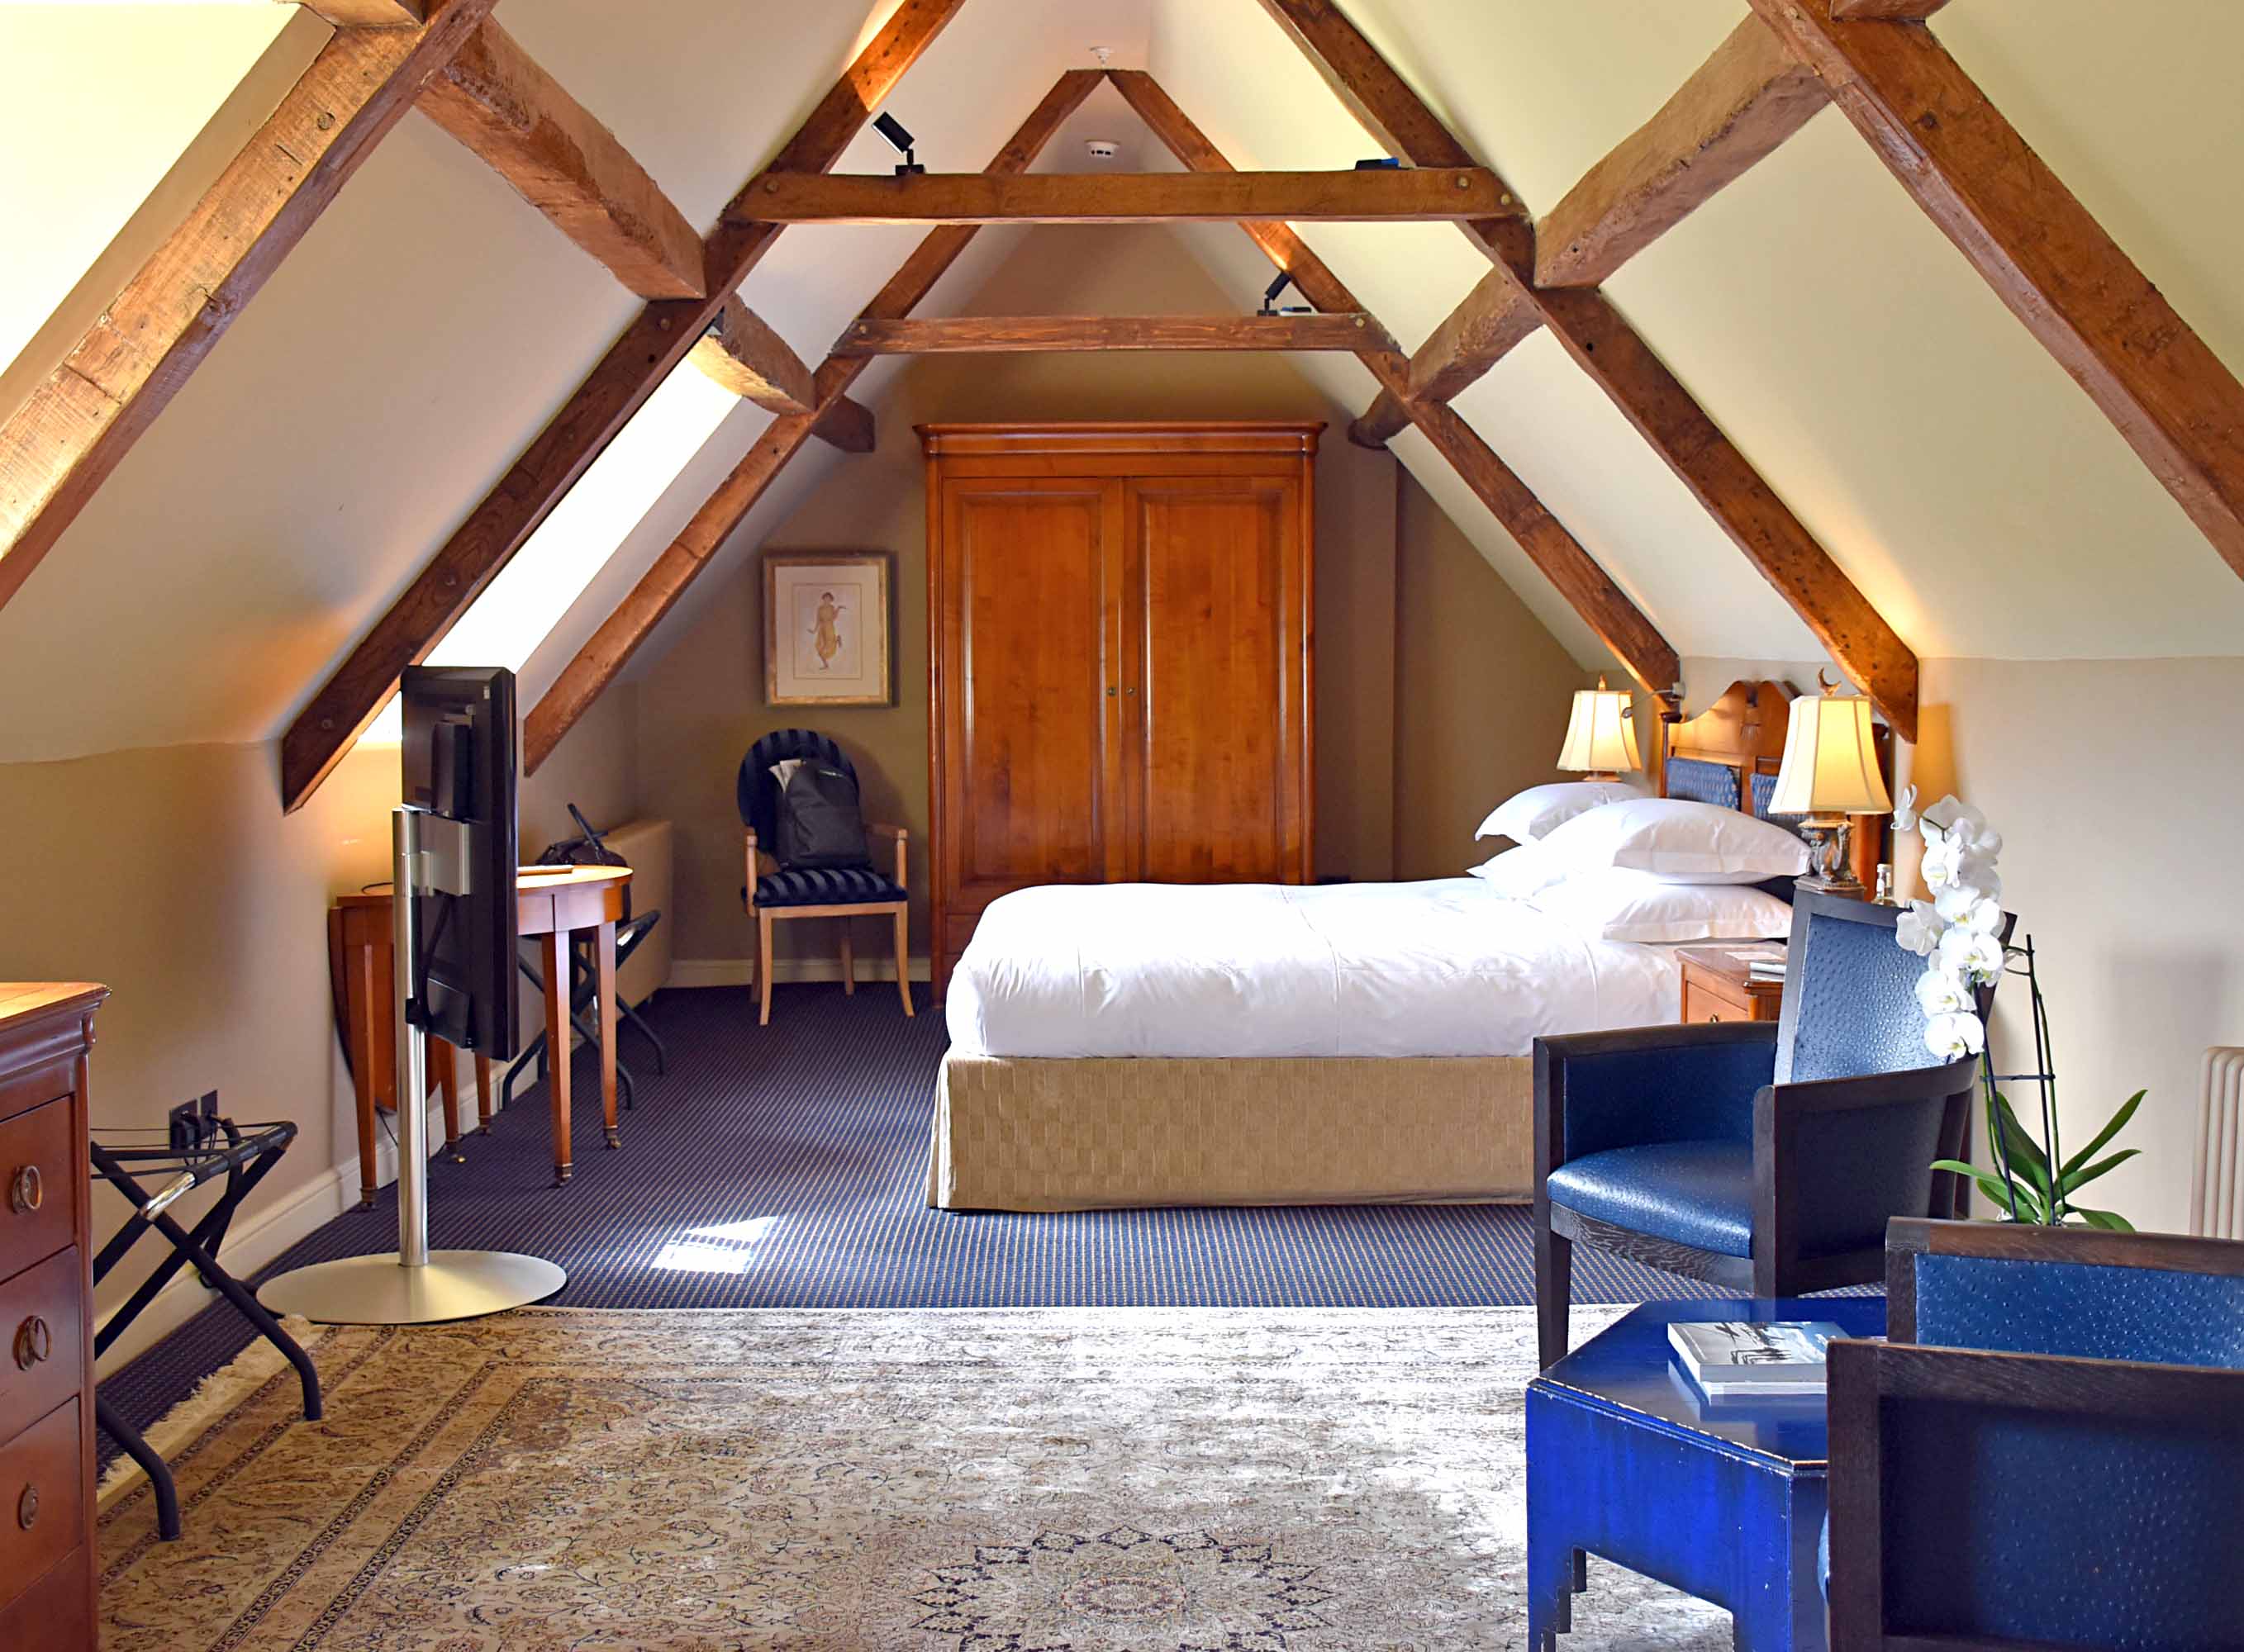 Whatley Manor Hotel Review: A First-Class Country Manor Stay in Malmesbury, Cotswolds